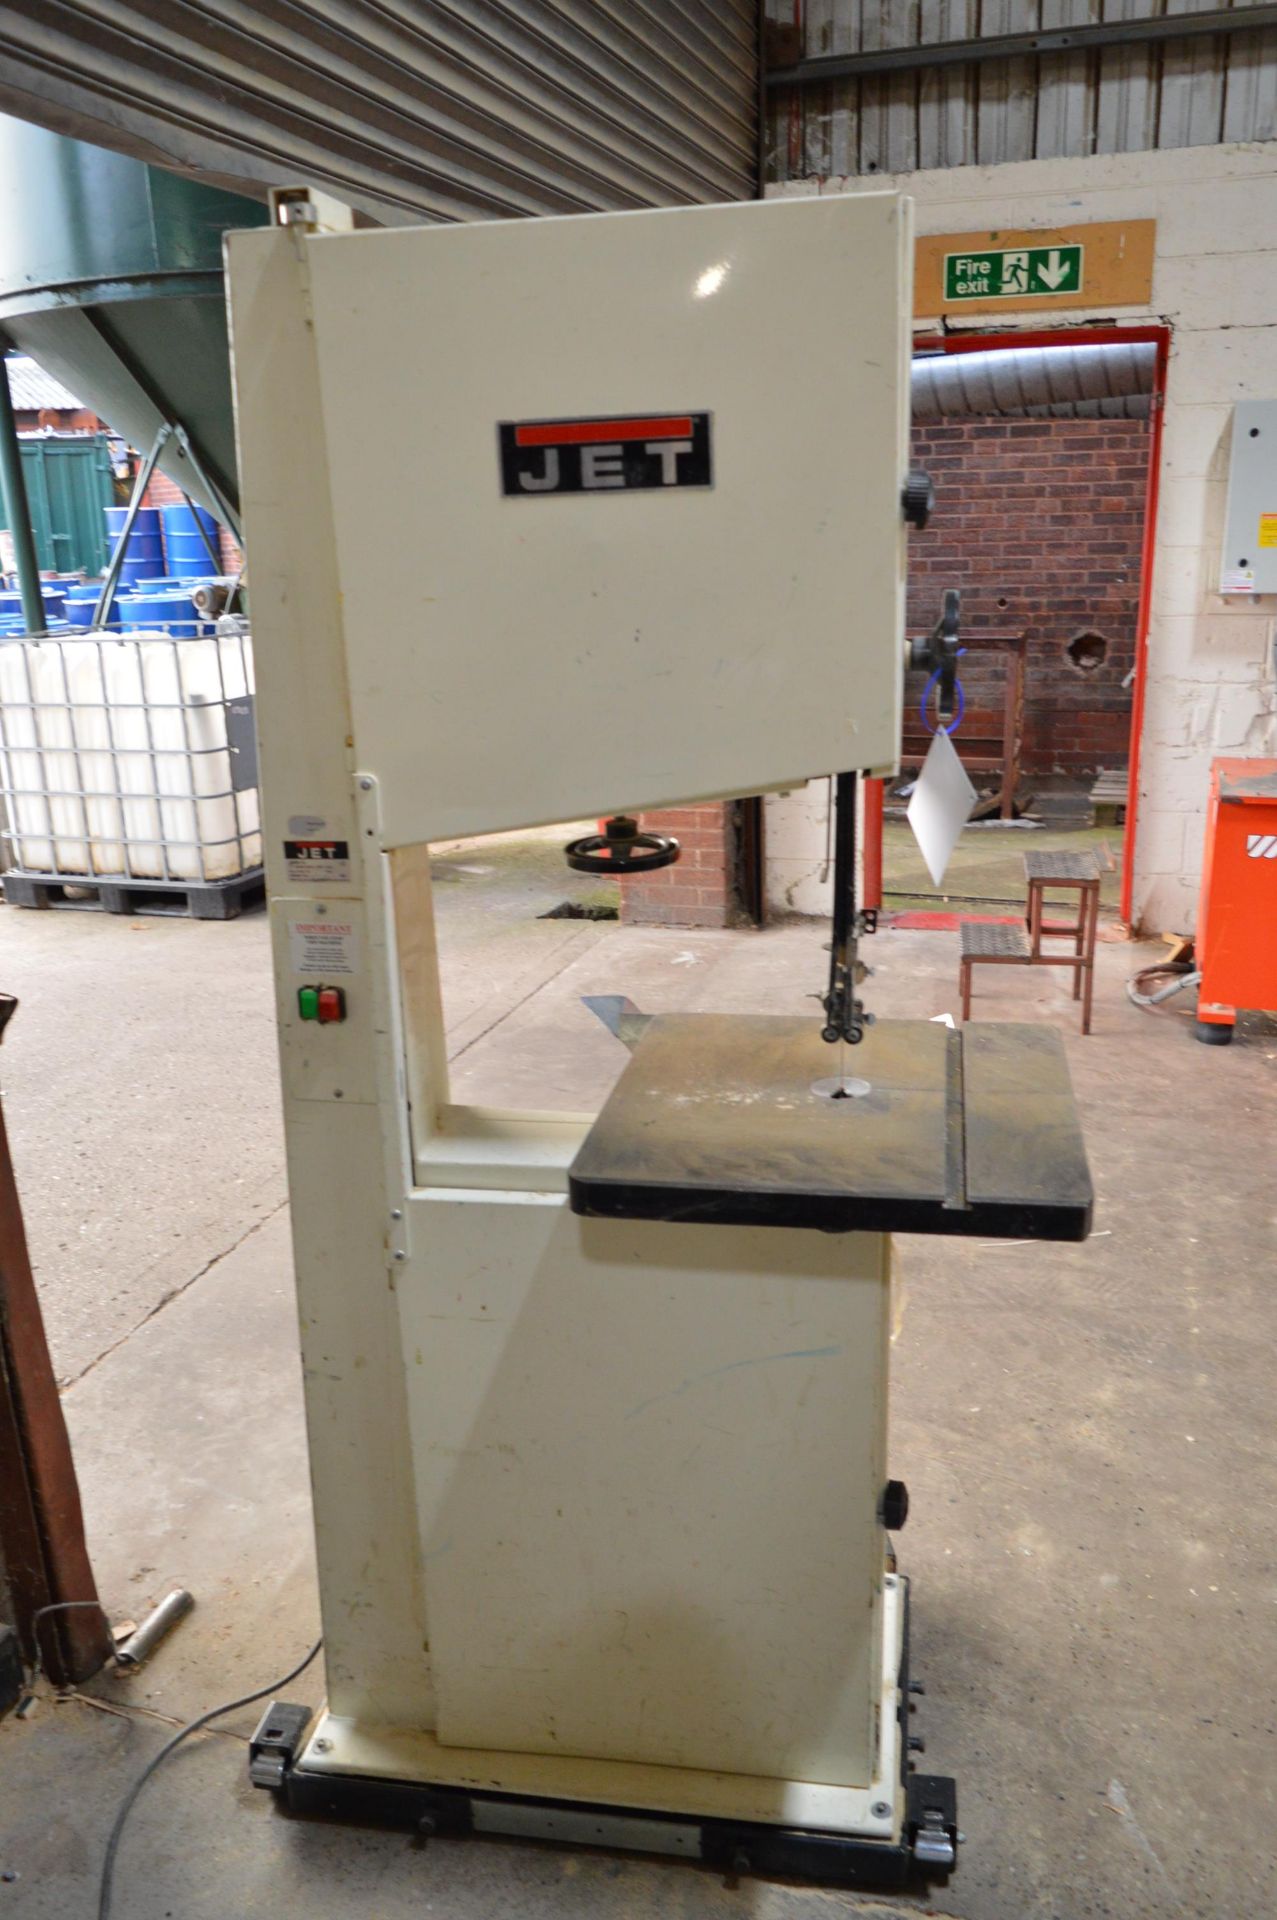 JET JWBS-18 vertical bandsaw, Serial No. 05111027 (2005) (Location: Two Gates)